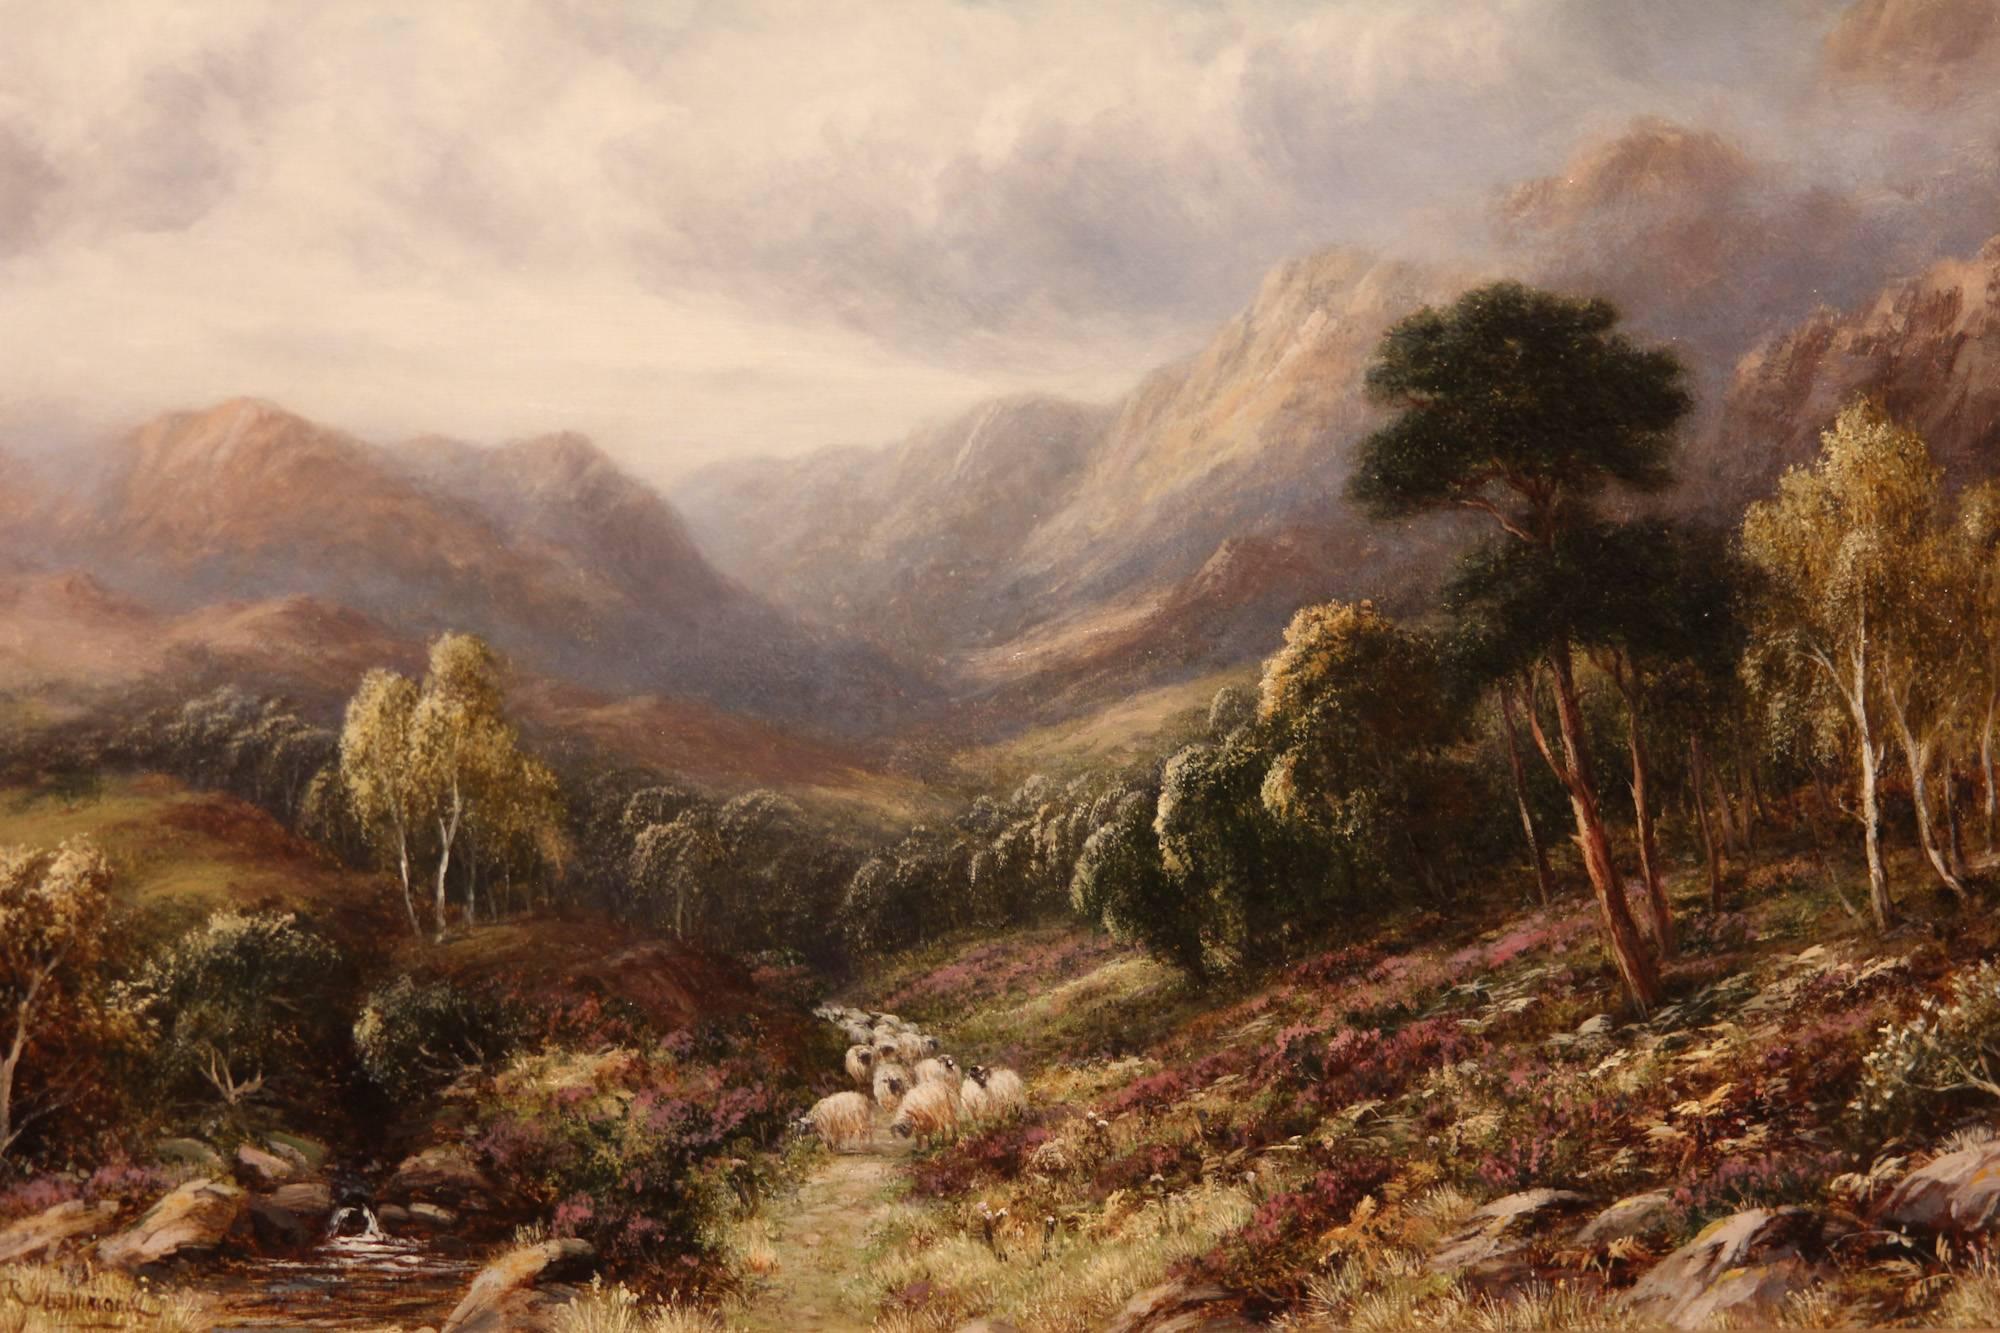 "A View in North Wales" oil painting by Robert John Hammond. Robert John Hammond, 1854-1911, was a popular Birmingham School landscape painter, and regular exhibitor at the Royal Birmingham Society. Oil on canvas, 10 x 14"